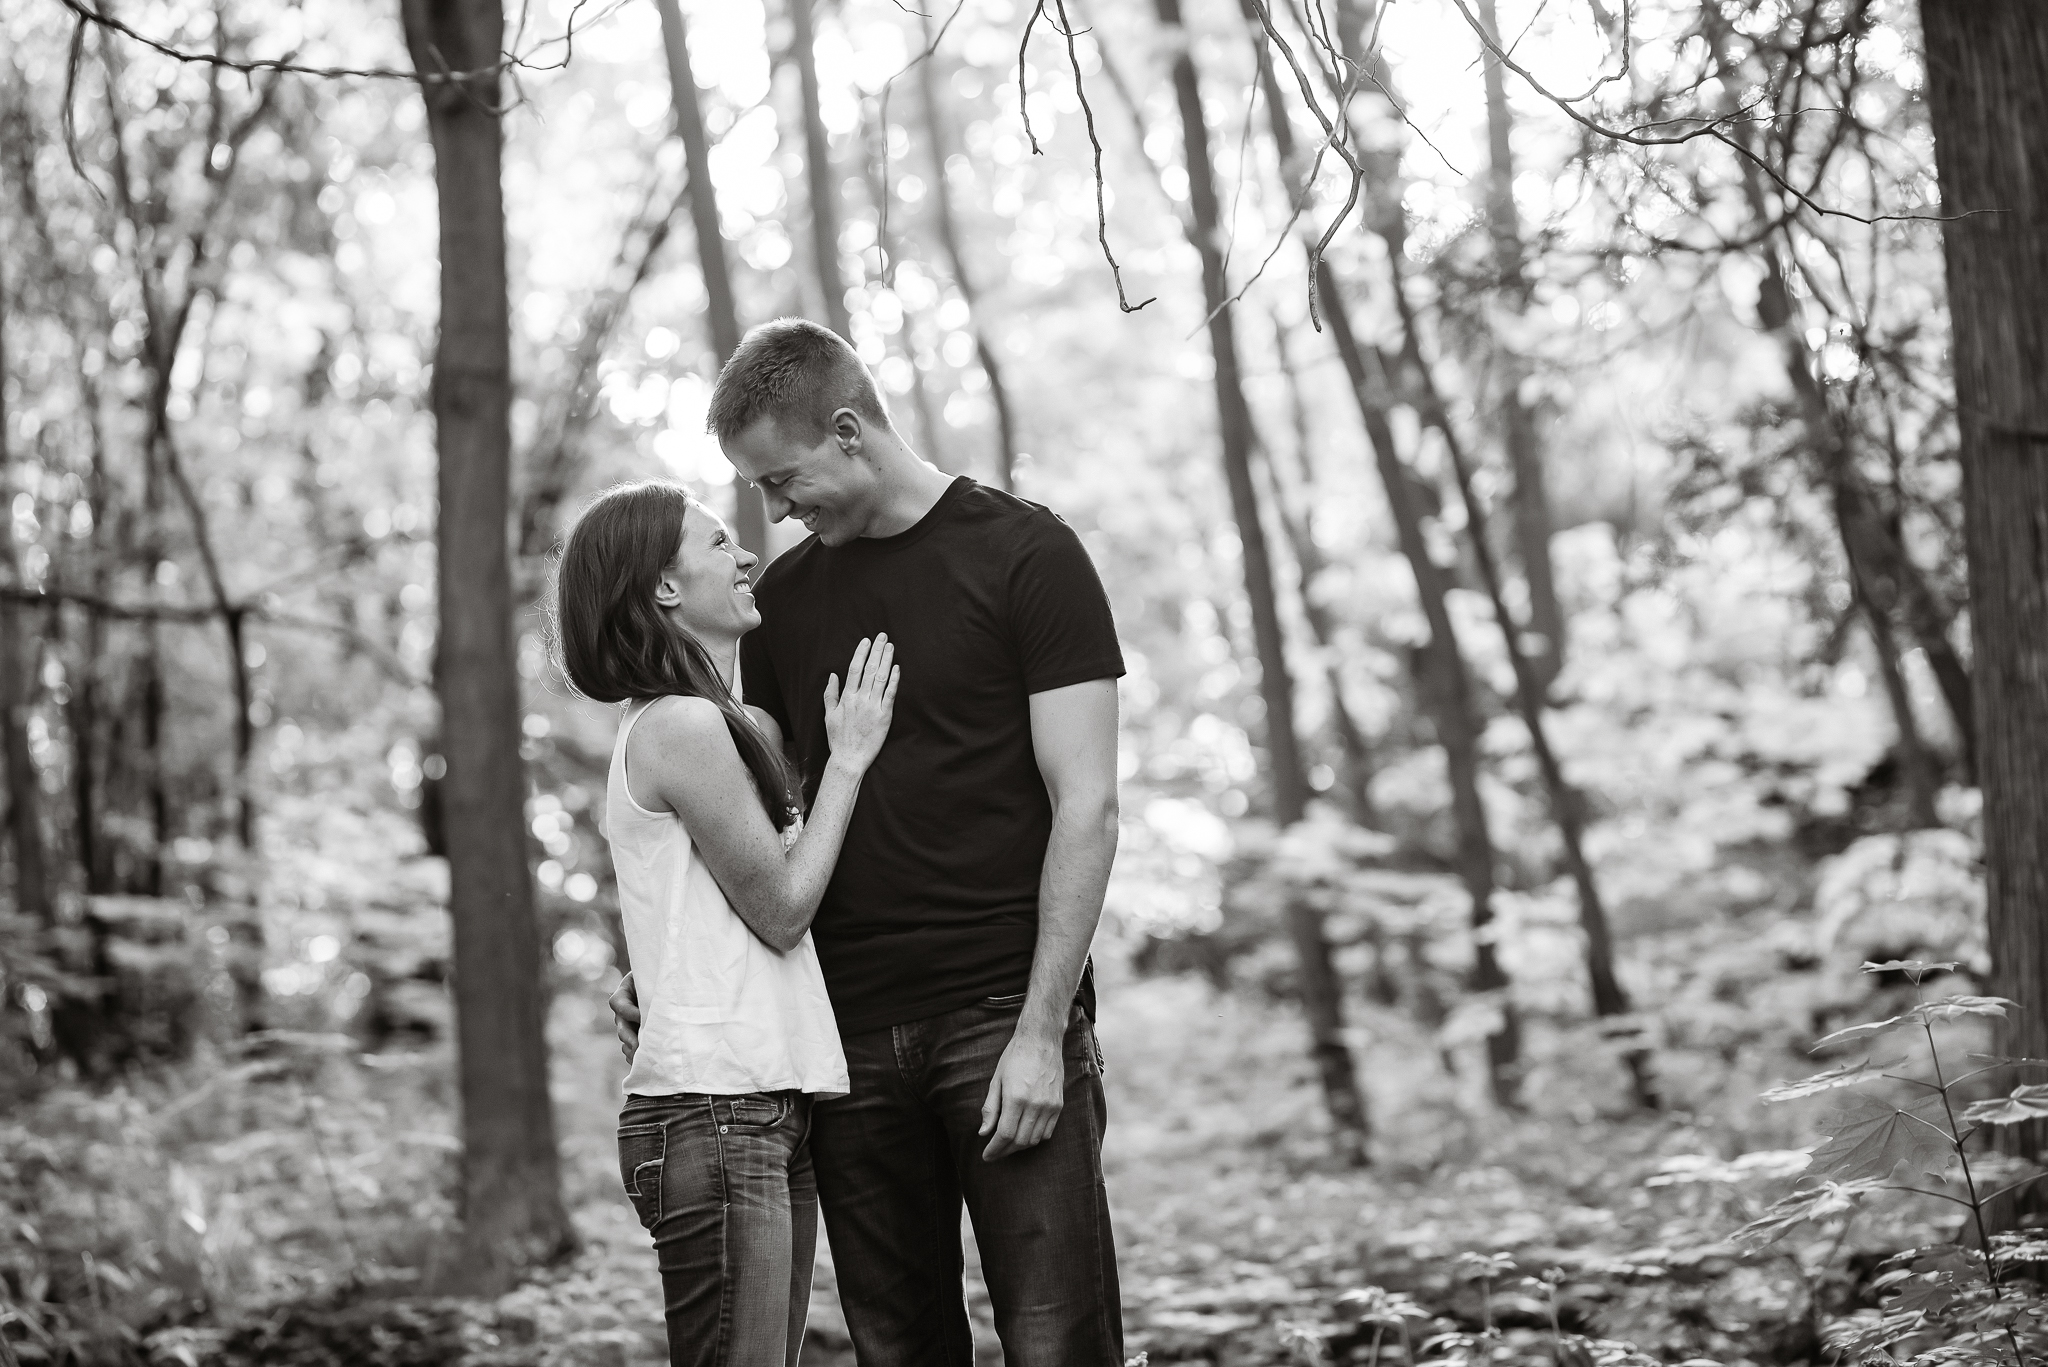 Couples28NaomiLuciennePhotography062019-5-Edit.jpg